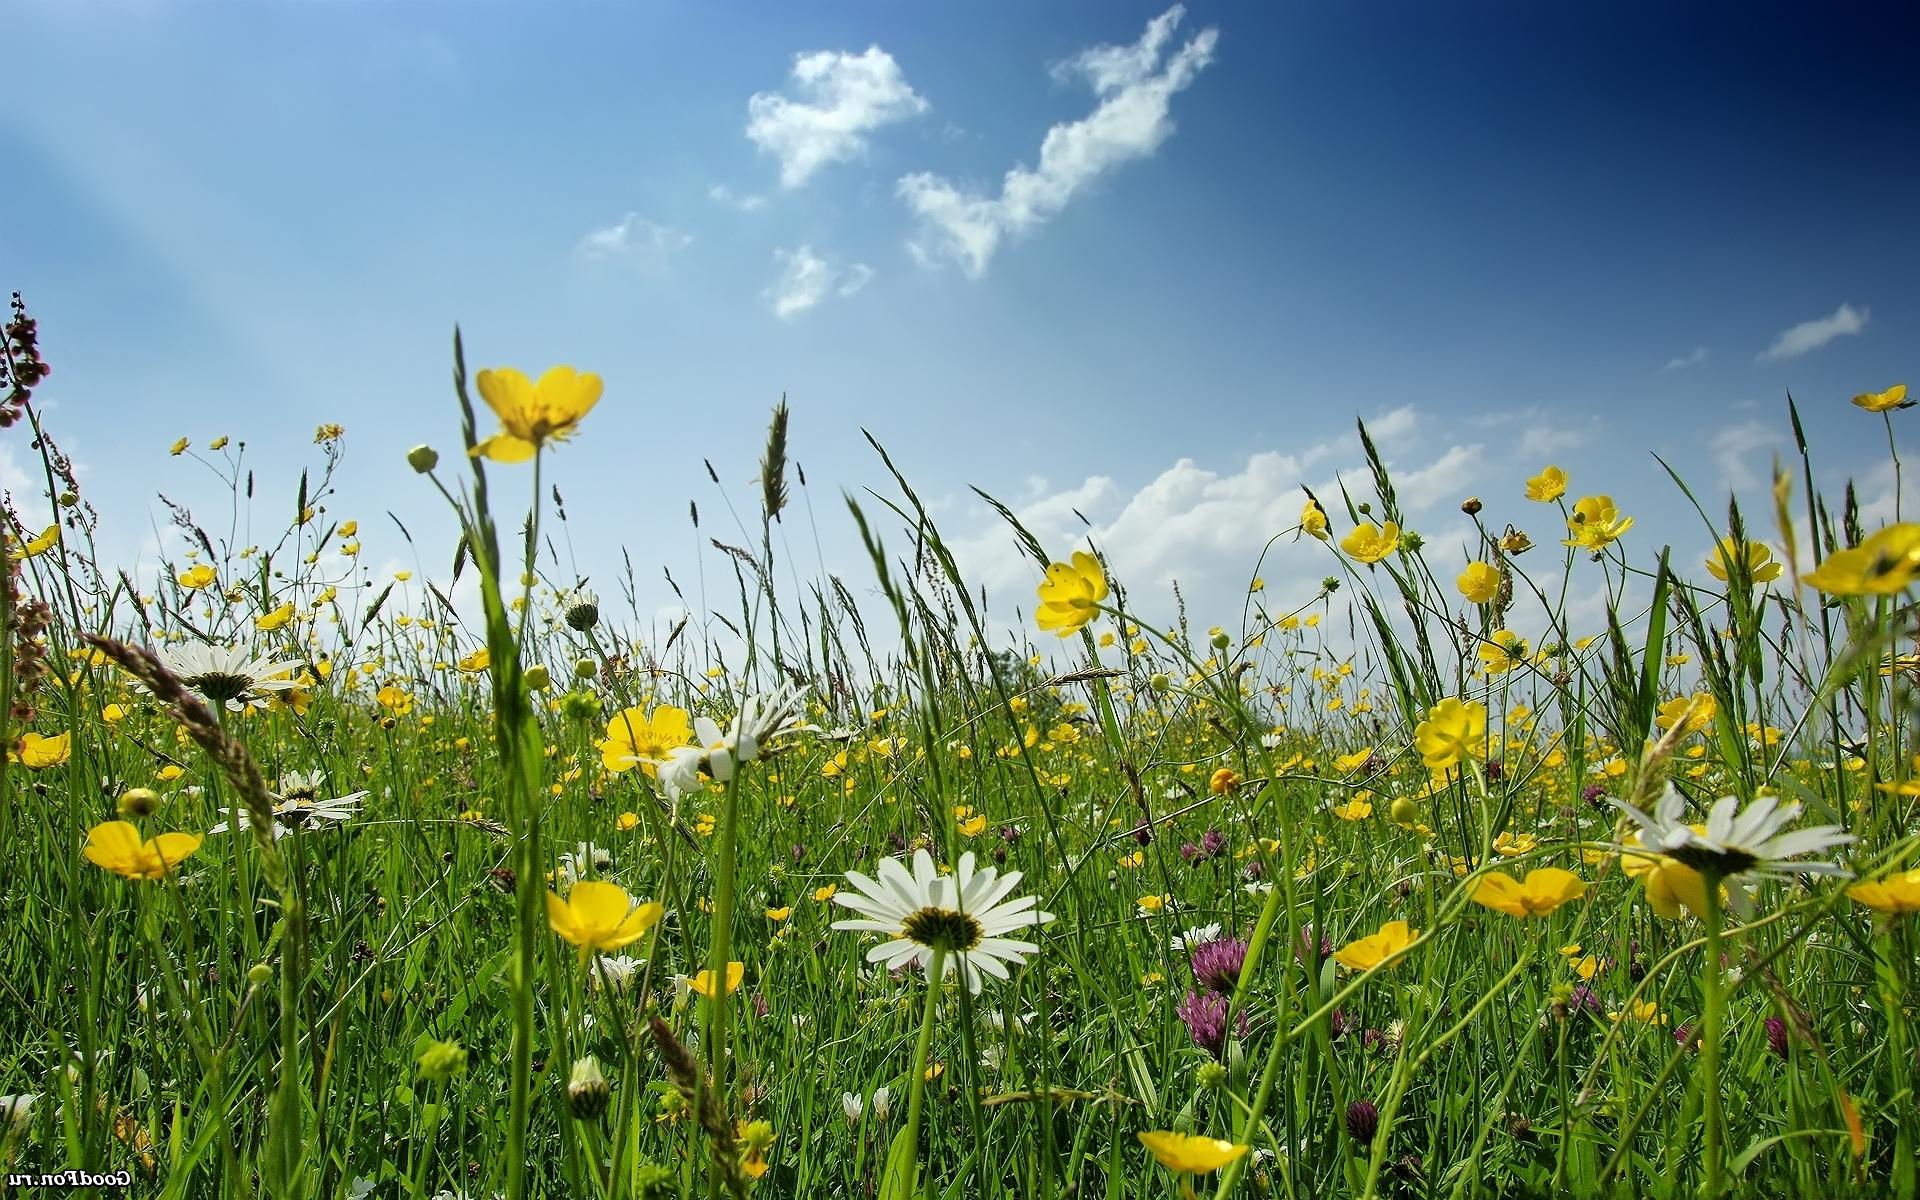 Spring Meadow Flowers And Green Grass Sky Hd Wallpaper : Wallpapers13.com